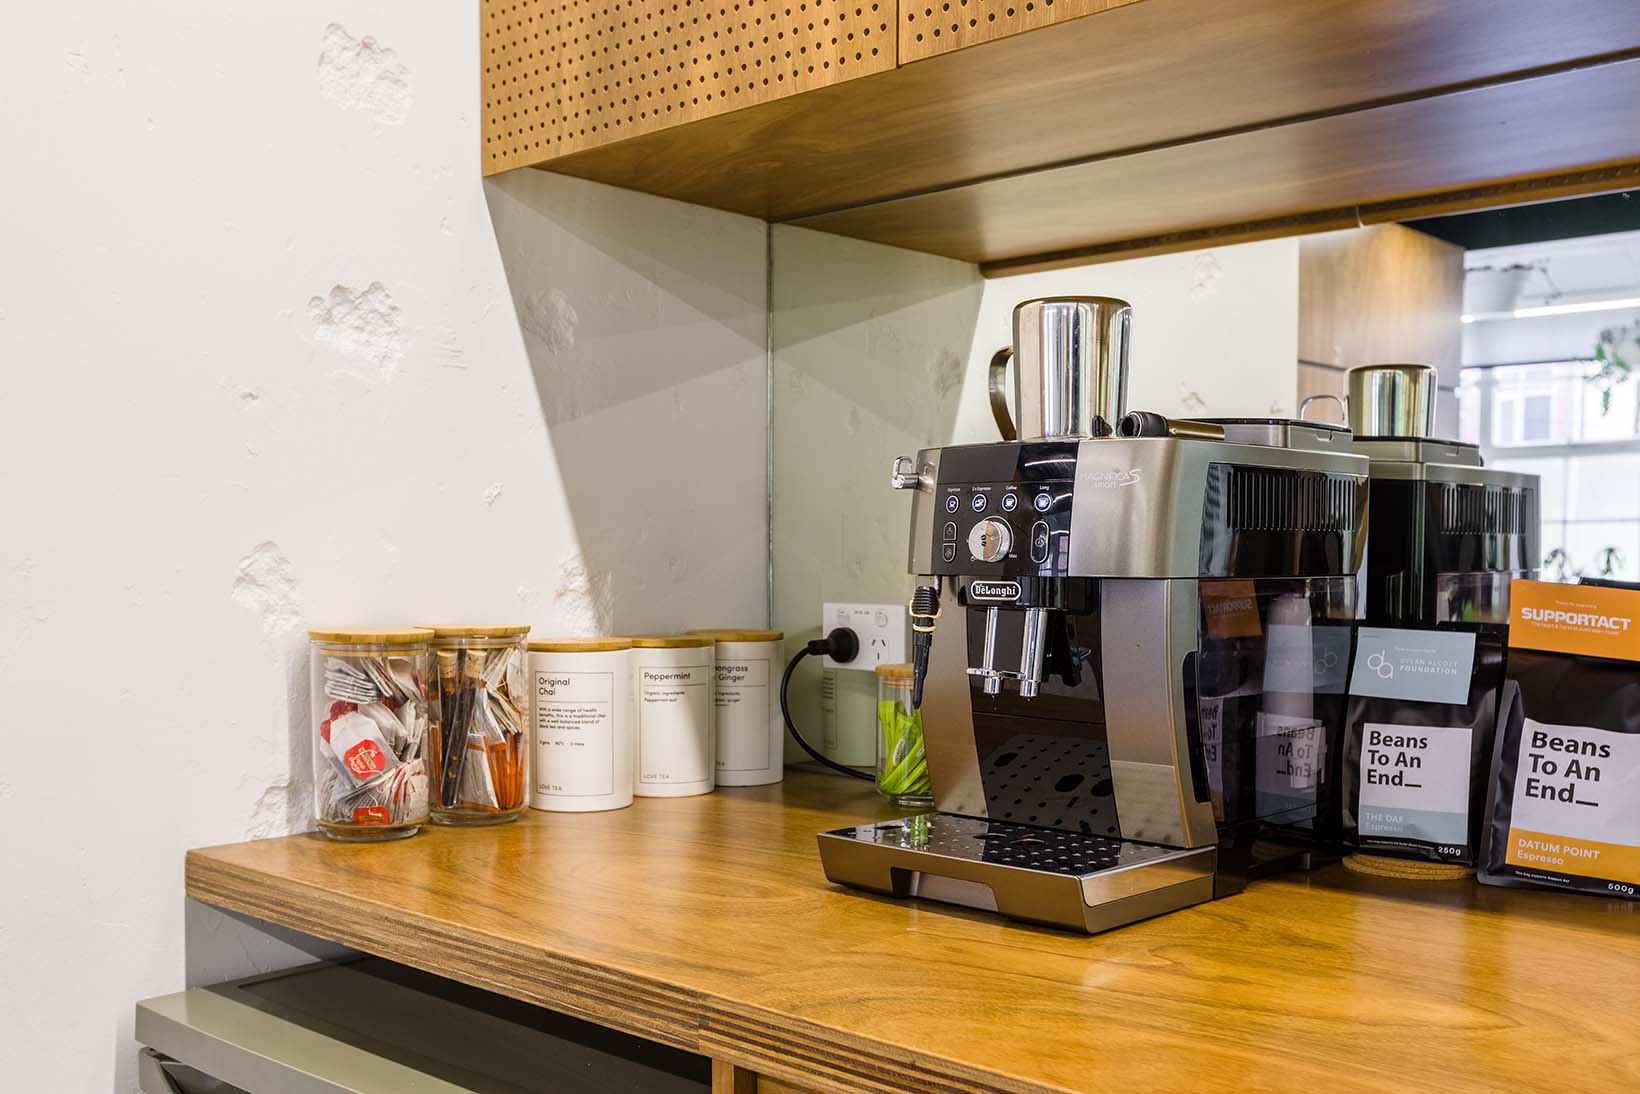 Photo of silver and black coffee machine in the corner of a wooden kitchenette. To the left are four ceramic canisters of tea and on top of the coffee machine is a silver jug.